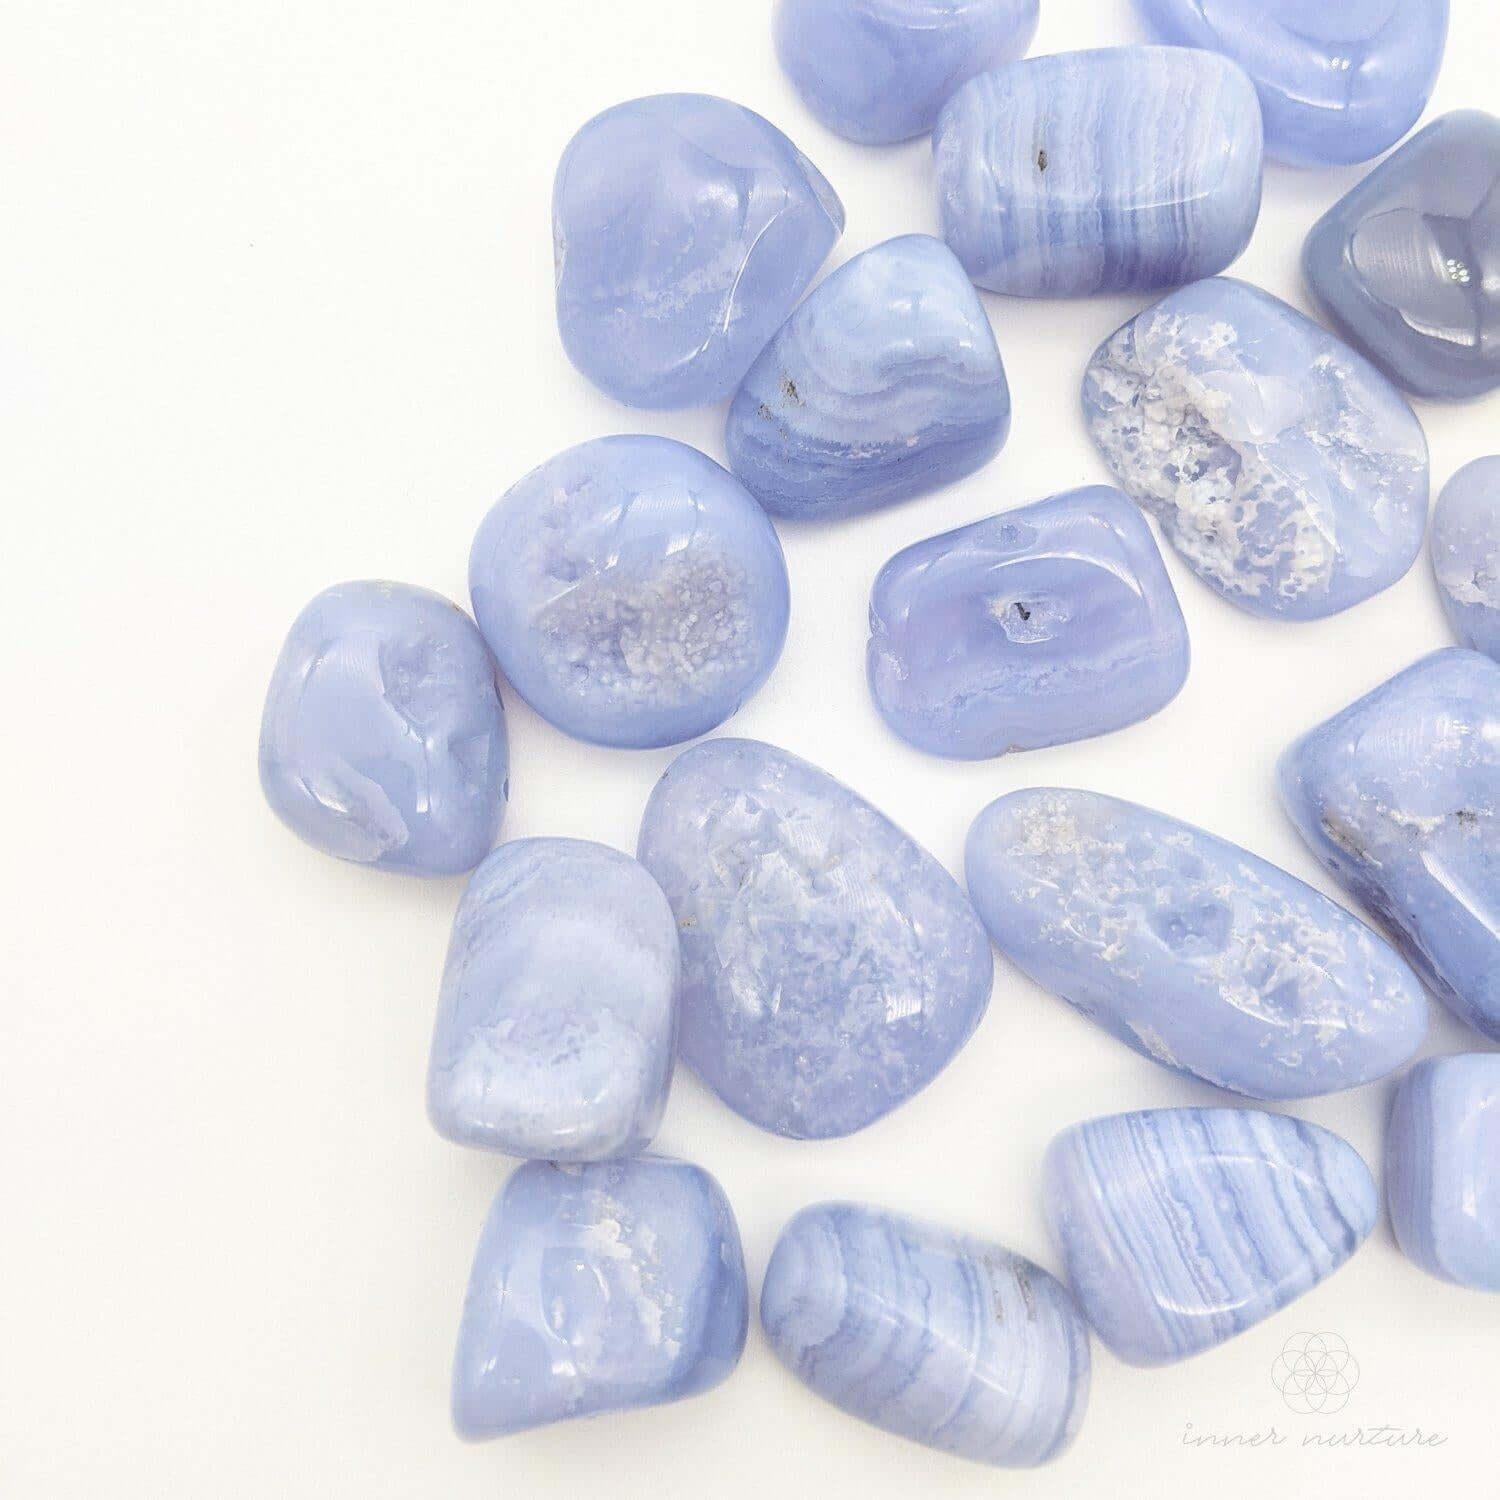 Blue Lace Agate Tumble - Crystal Shop Australia | Inner Nurture - Ethically Sourced - Buy Crystals Online